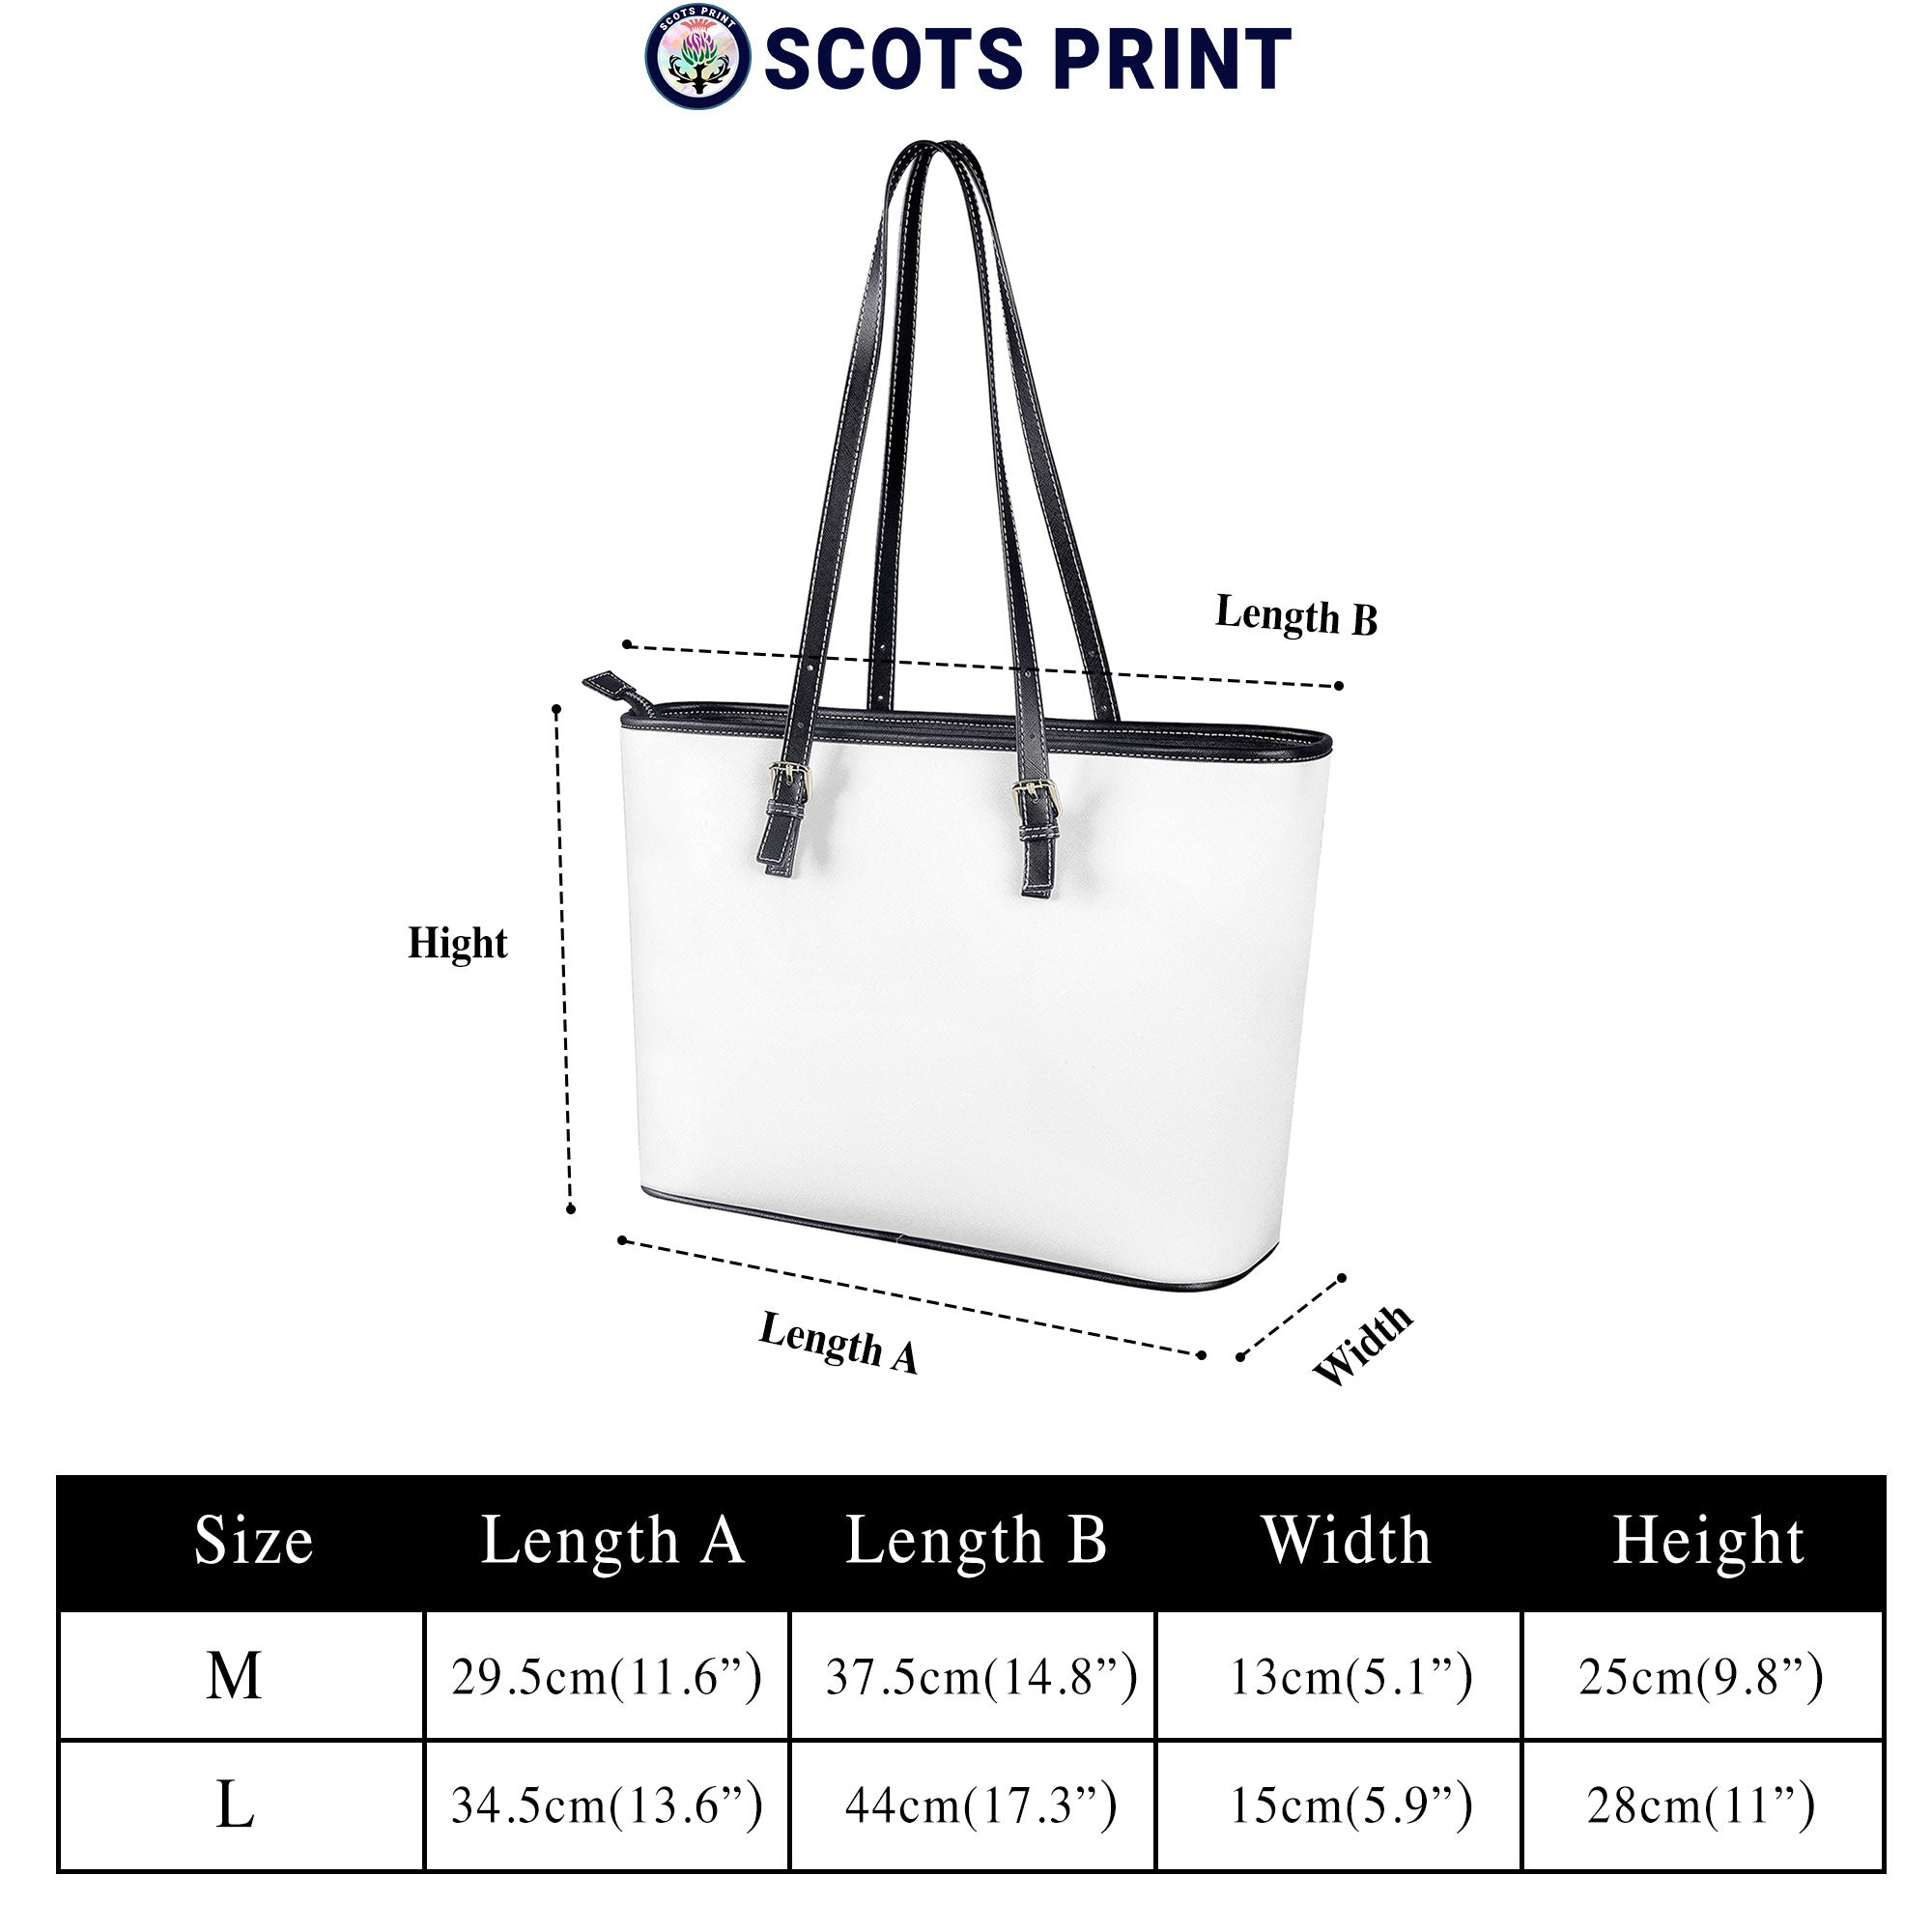 Gray Hunting Tartan Crest Leather Tote Bag